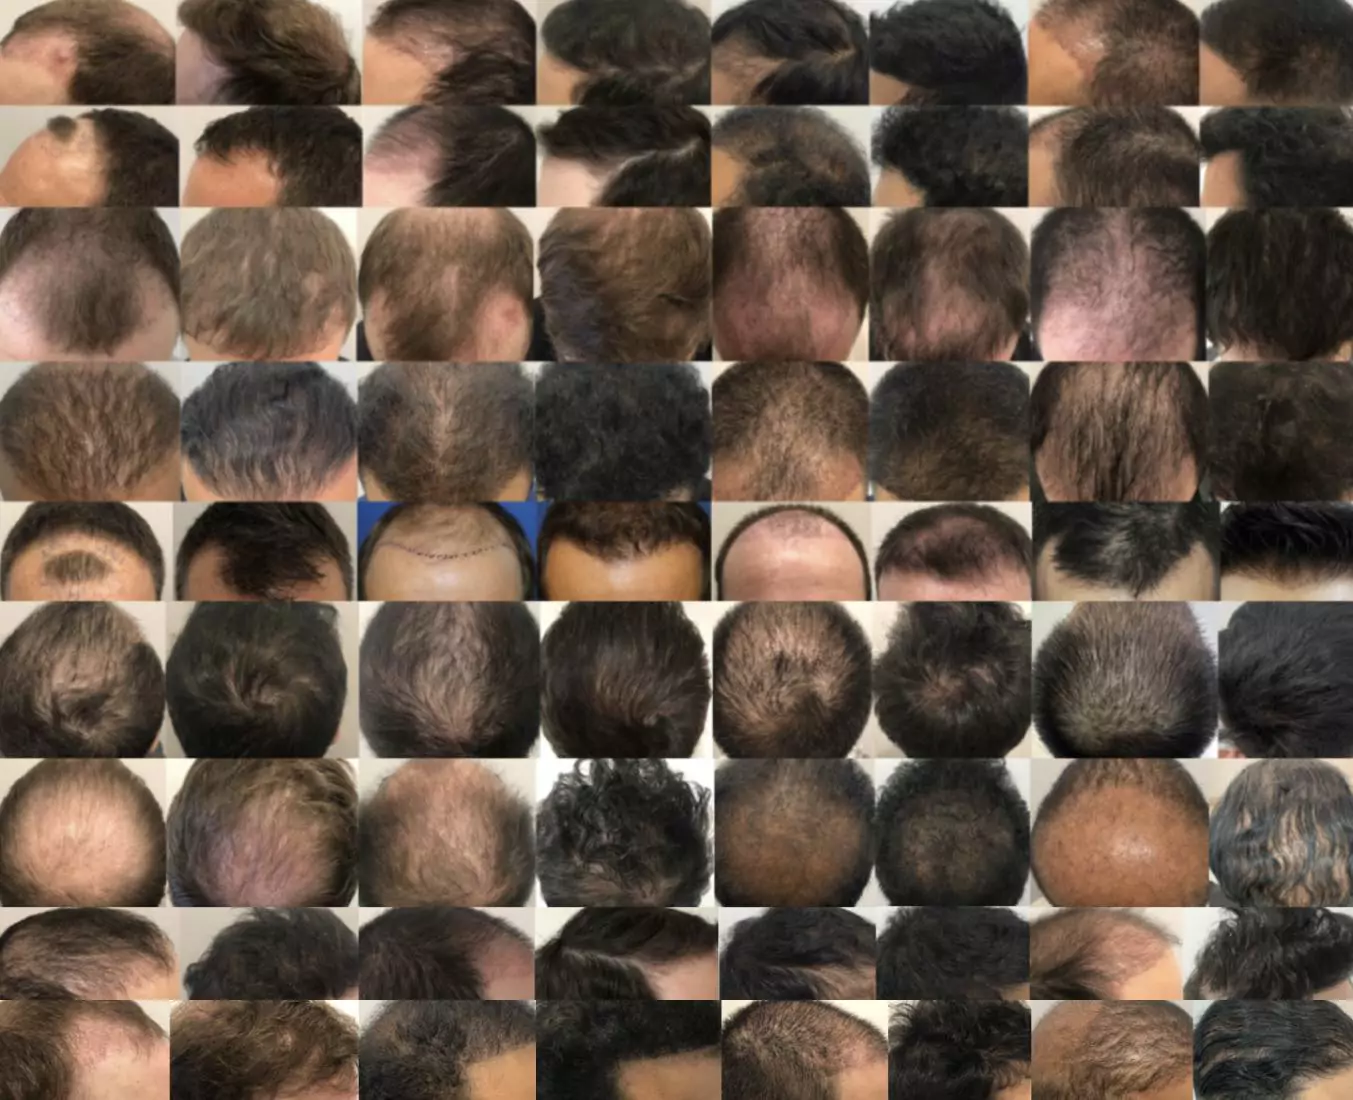 hair transplants before and after slideshow